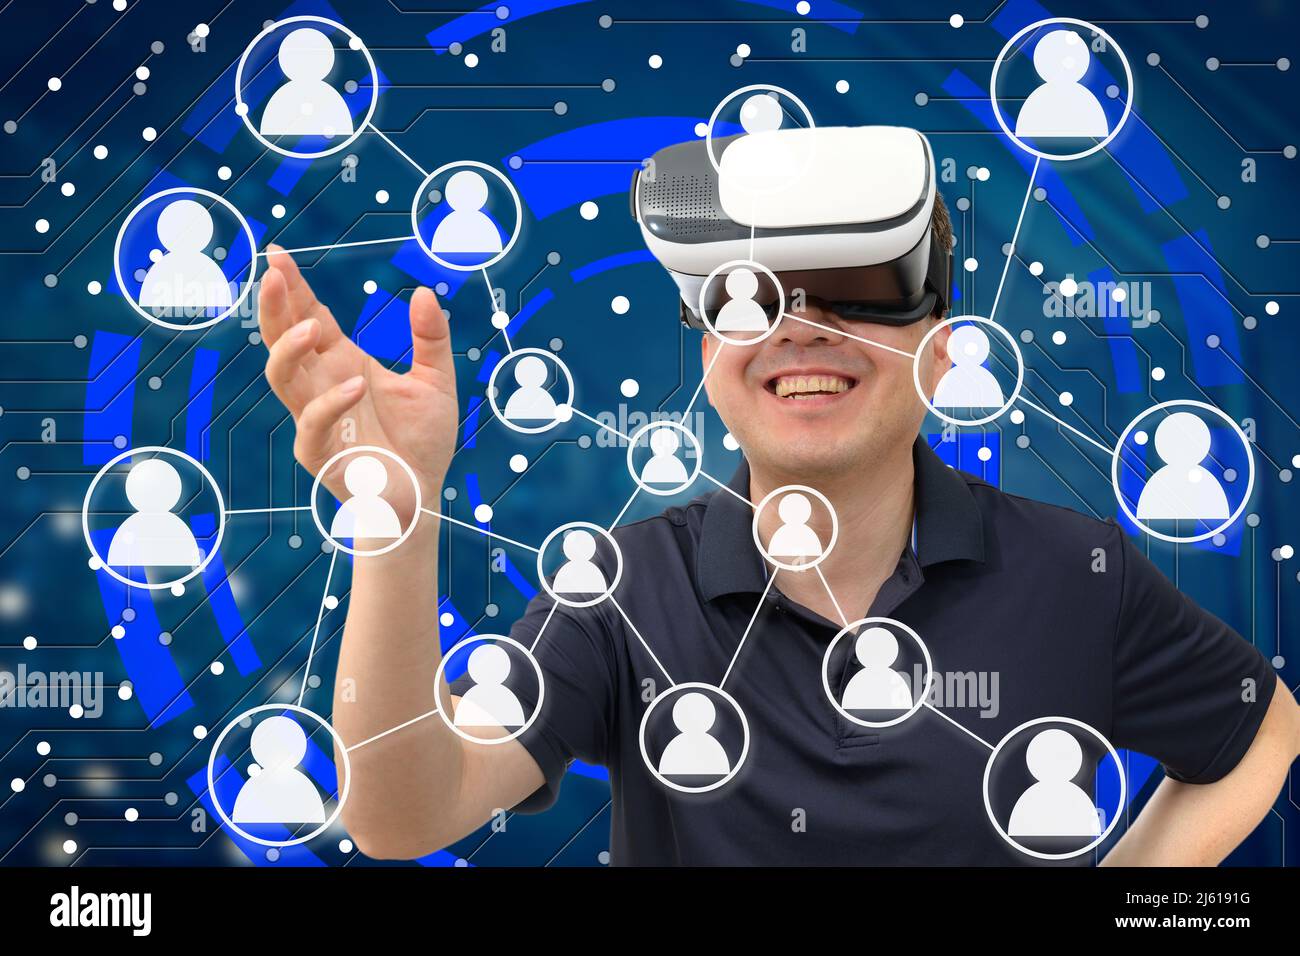 A man wearing a VR headset. Metaverse, cyber virtual society concept Stock Photo